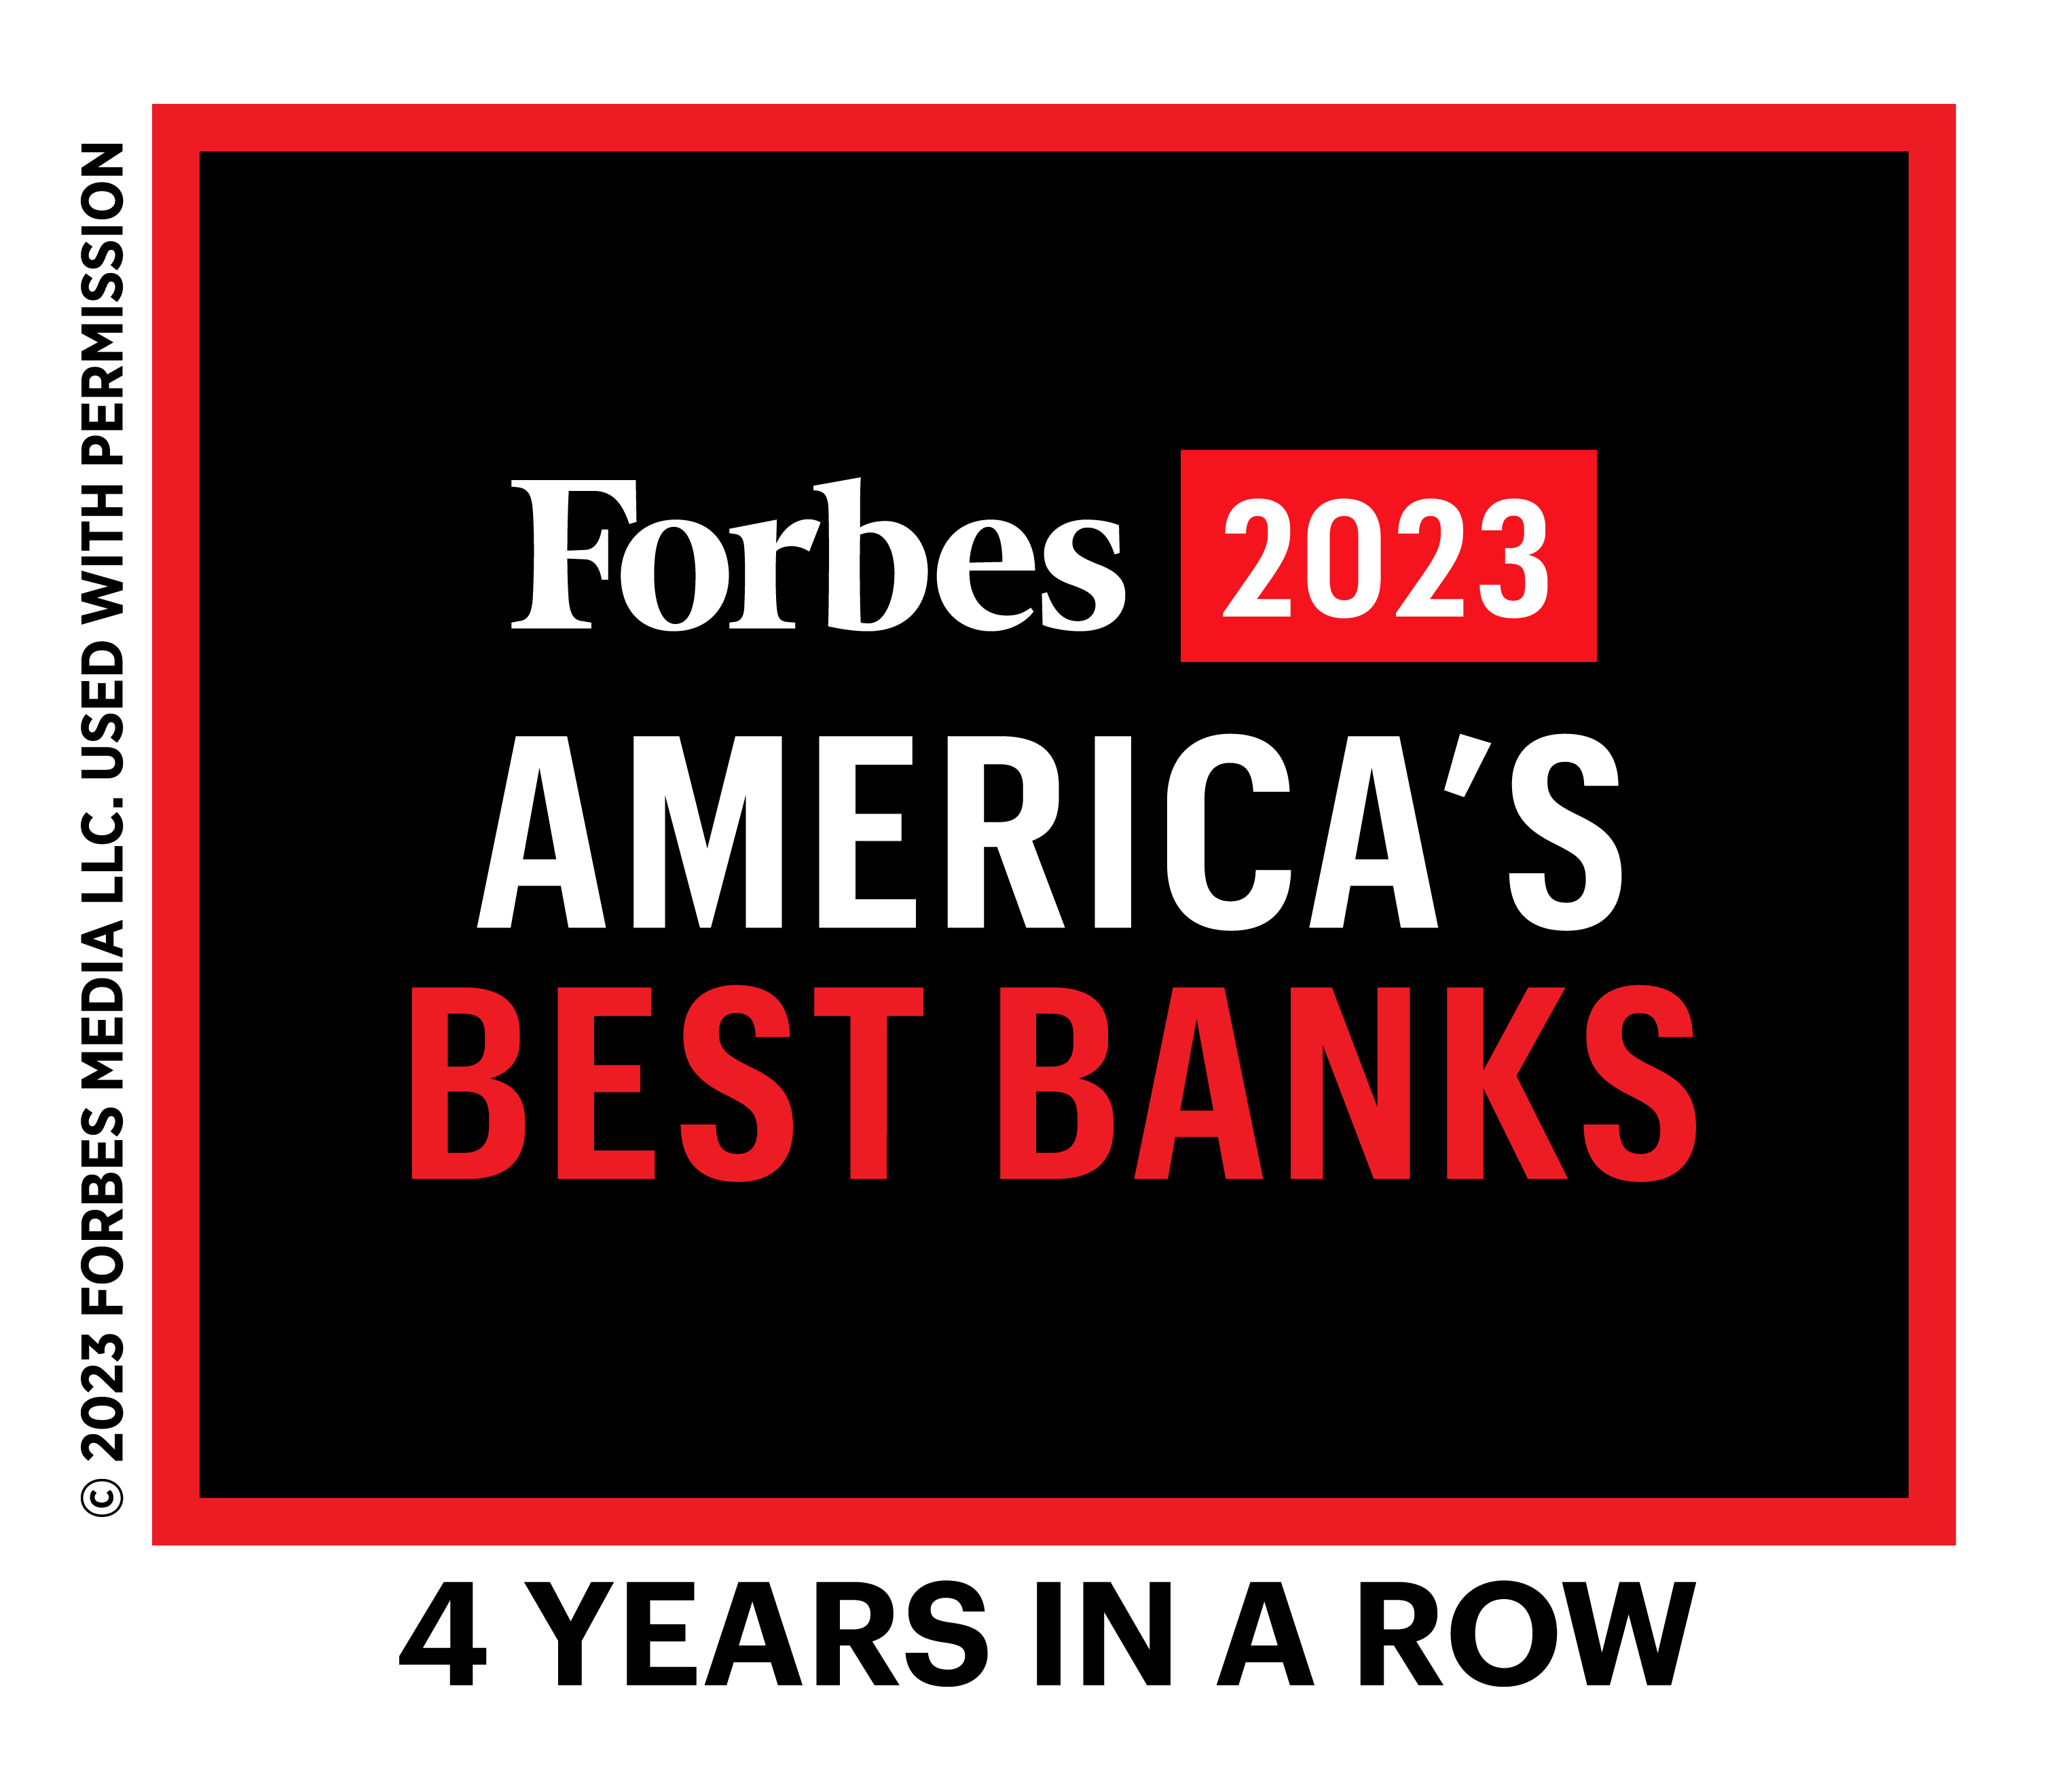 Forbes 2023 | America's Best Banks | 4 Years in a Row | © 2023 Forbes Media LLC. | Used with Permission